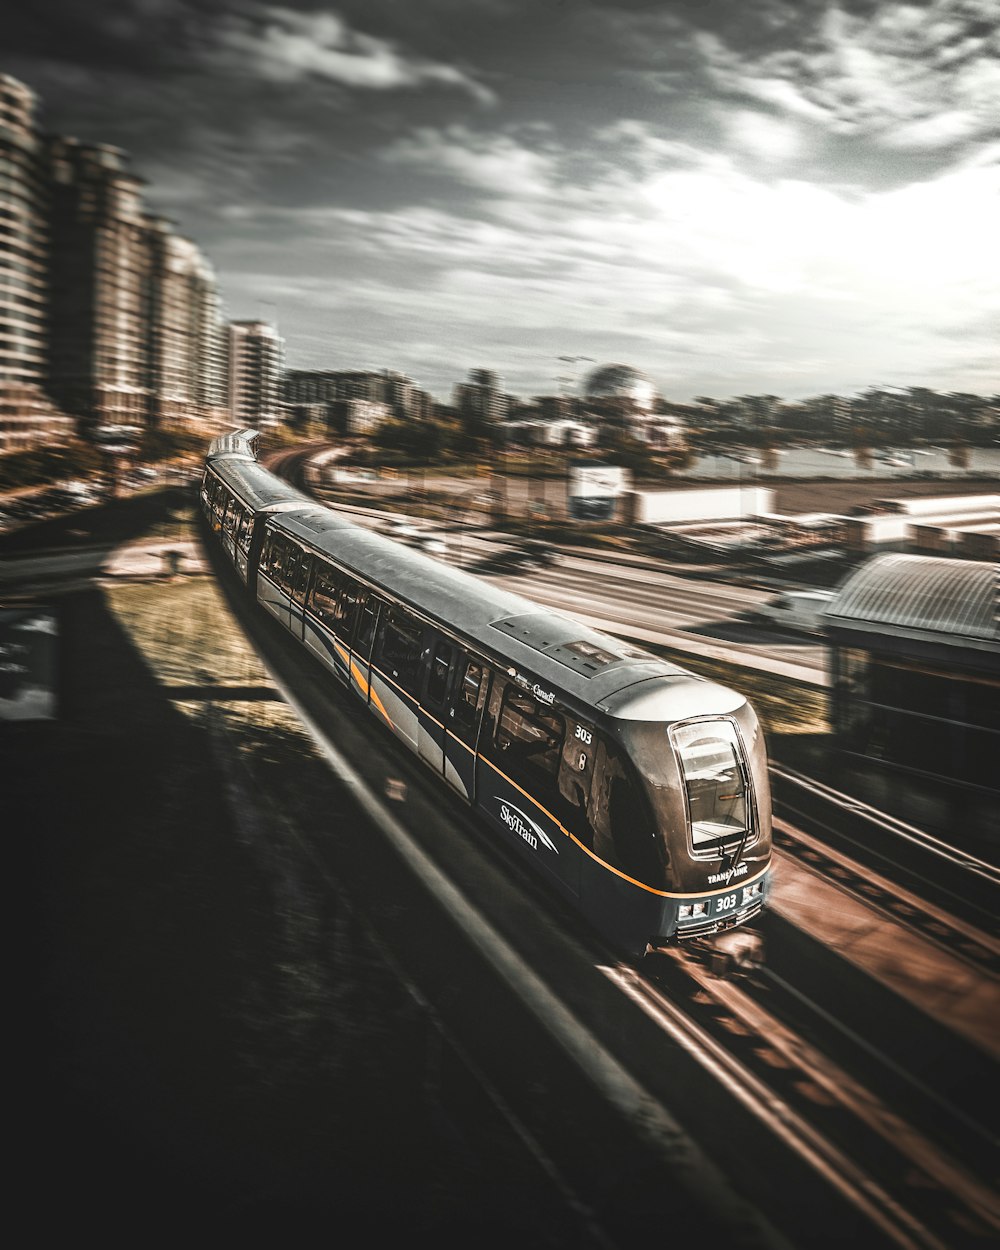 train running on railroad during daytime timelapse photography